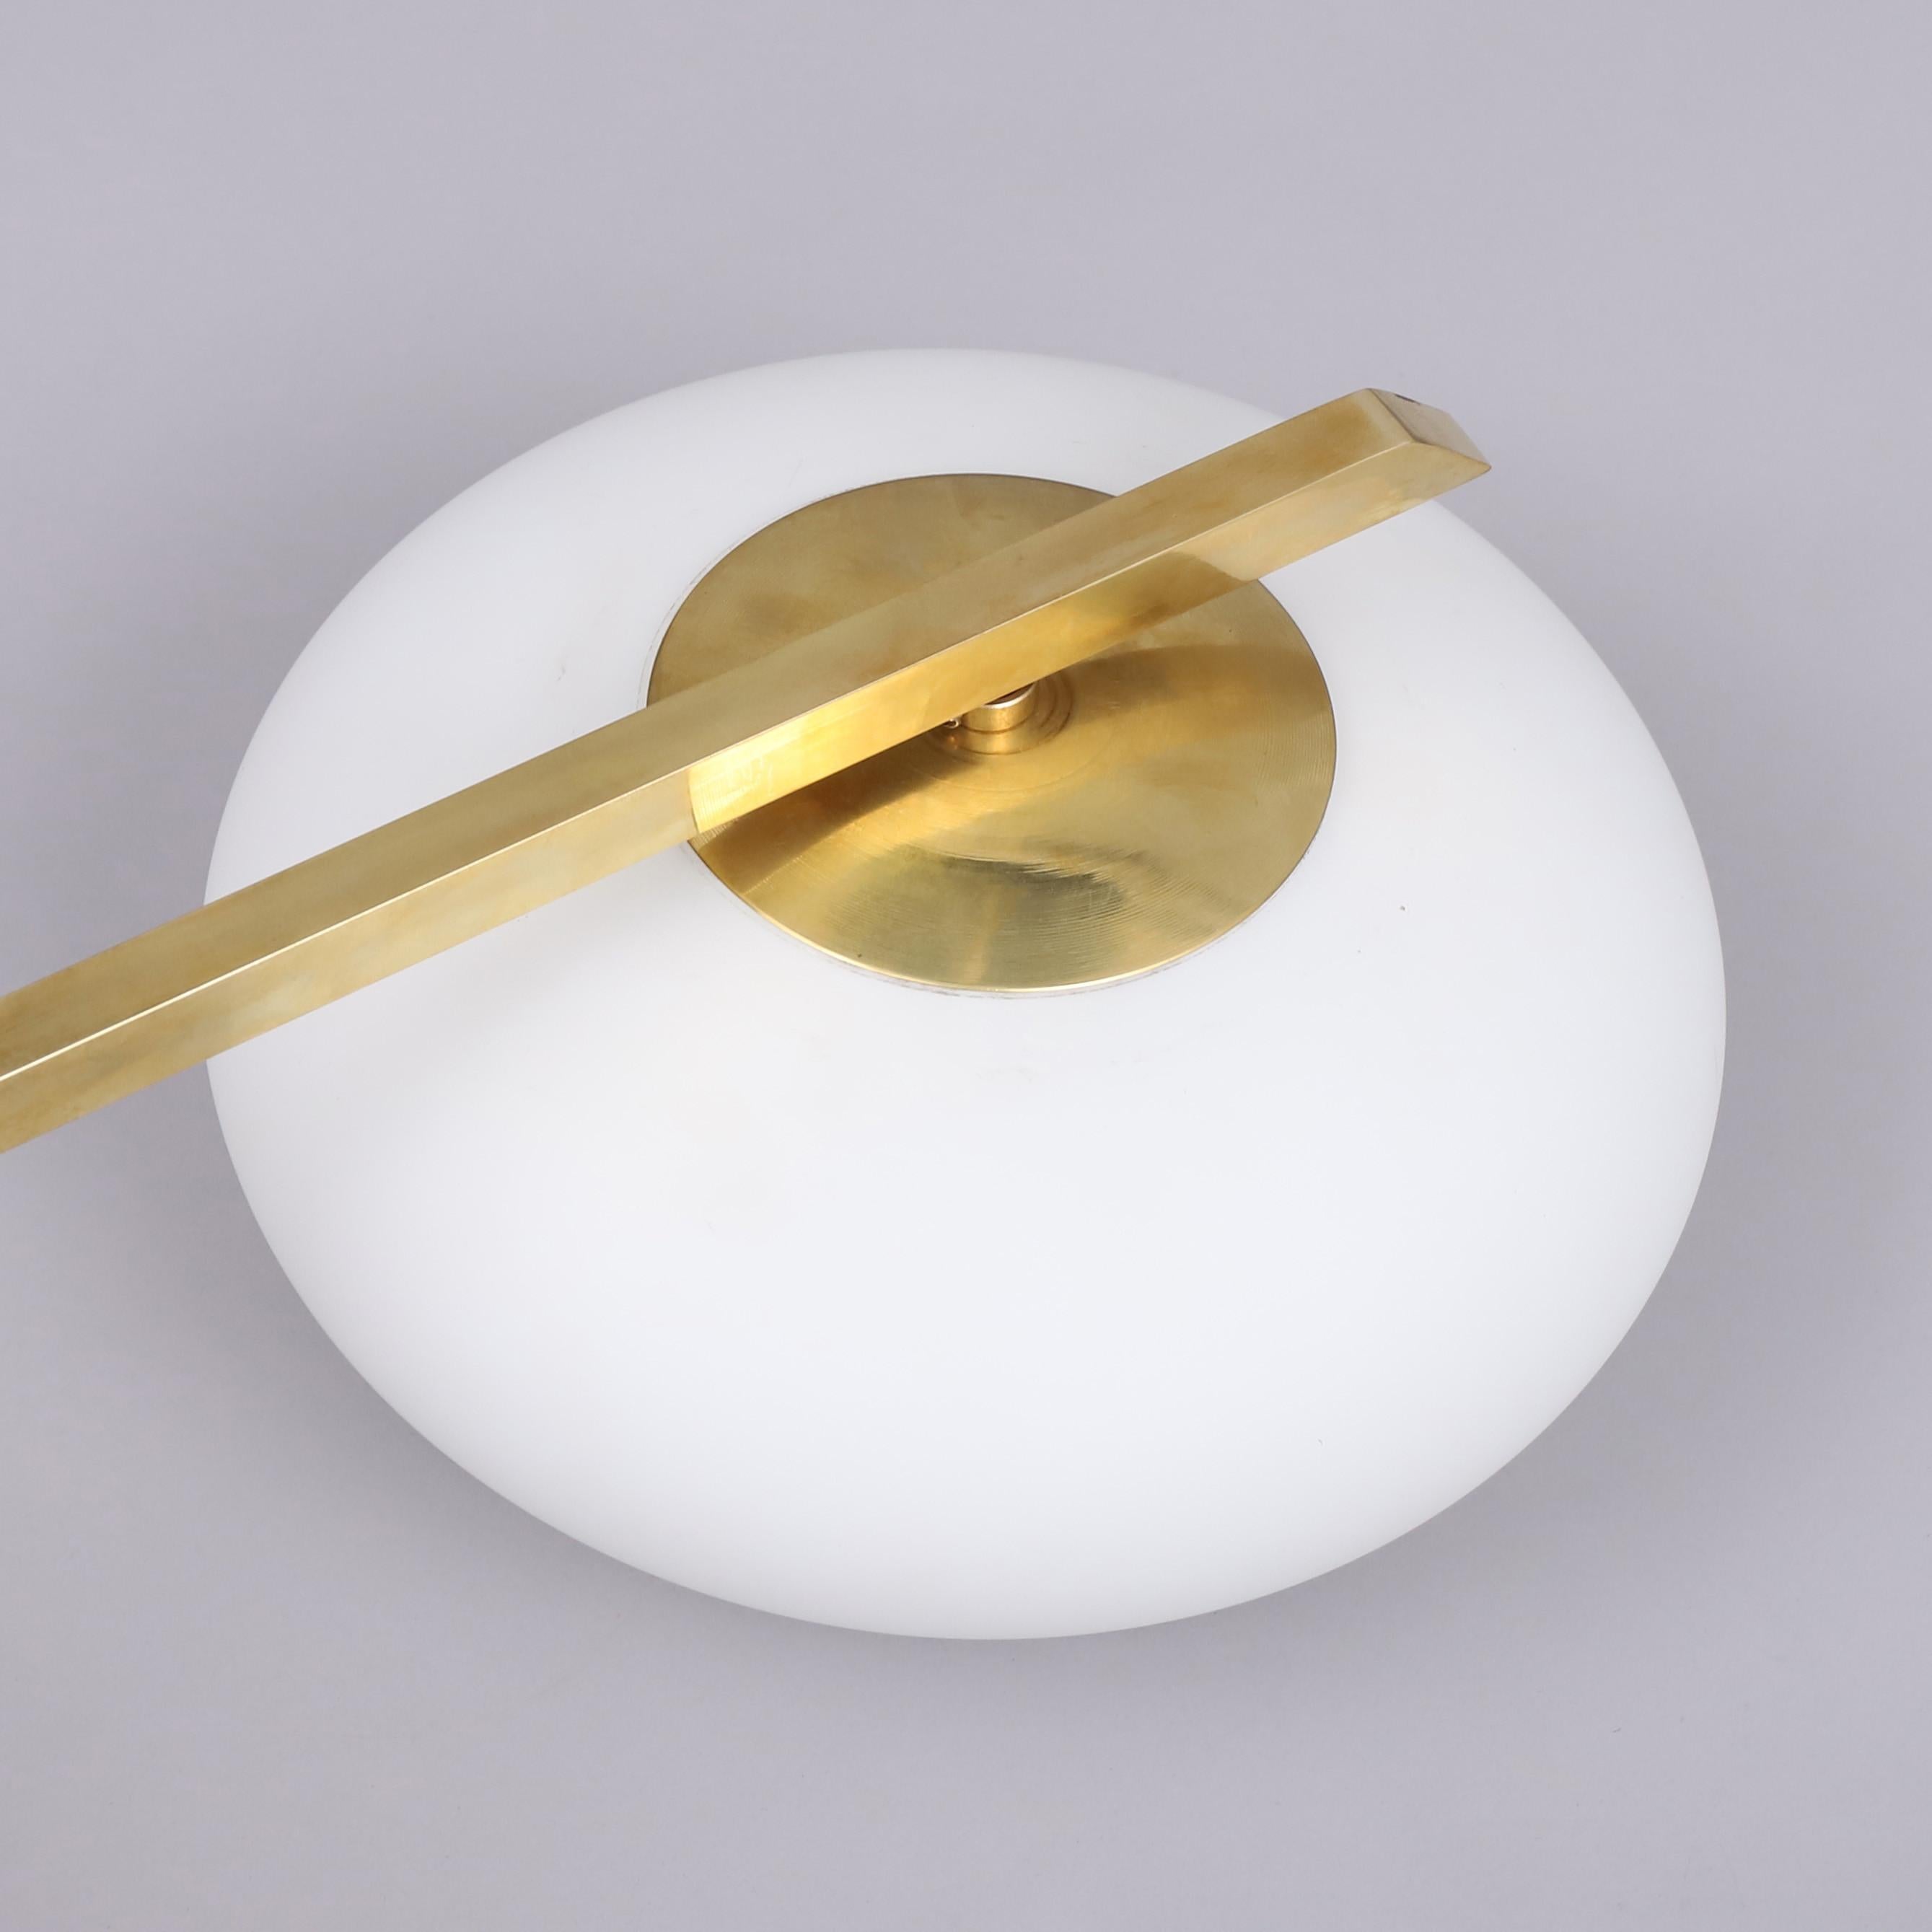 Ceiling light wall light  in the style of  Angelo Lelli For Arredoluce  a recent edition made in Italy  circa 1990/2000
This model can be use as a ceiling lamp or a wall light.
Made of brass and 2 opalin white glass to hide the bulbs.
Good condition.